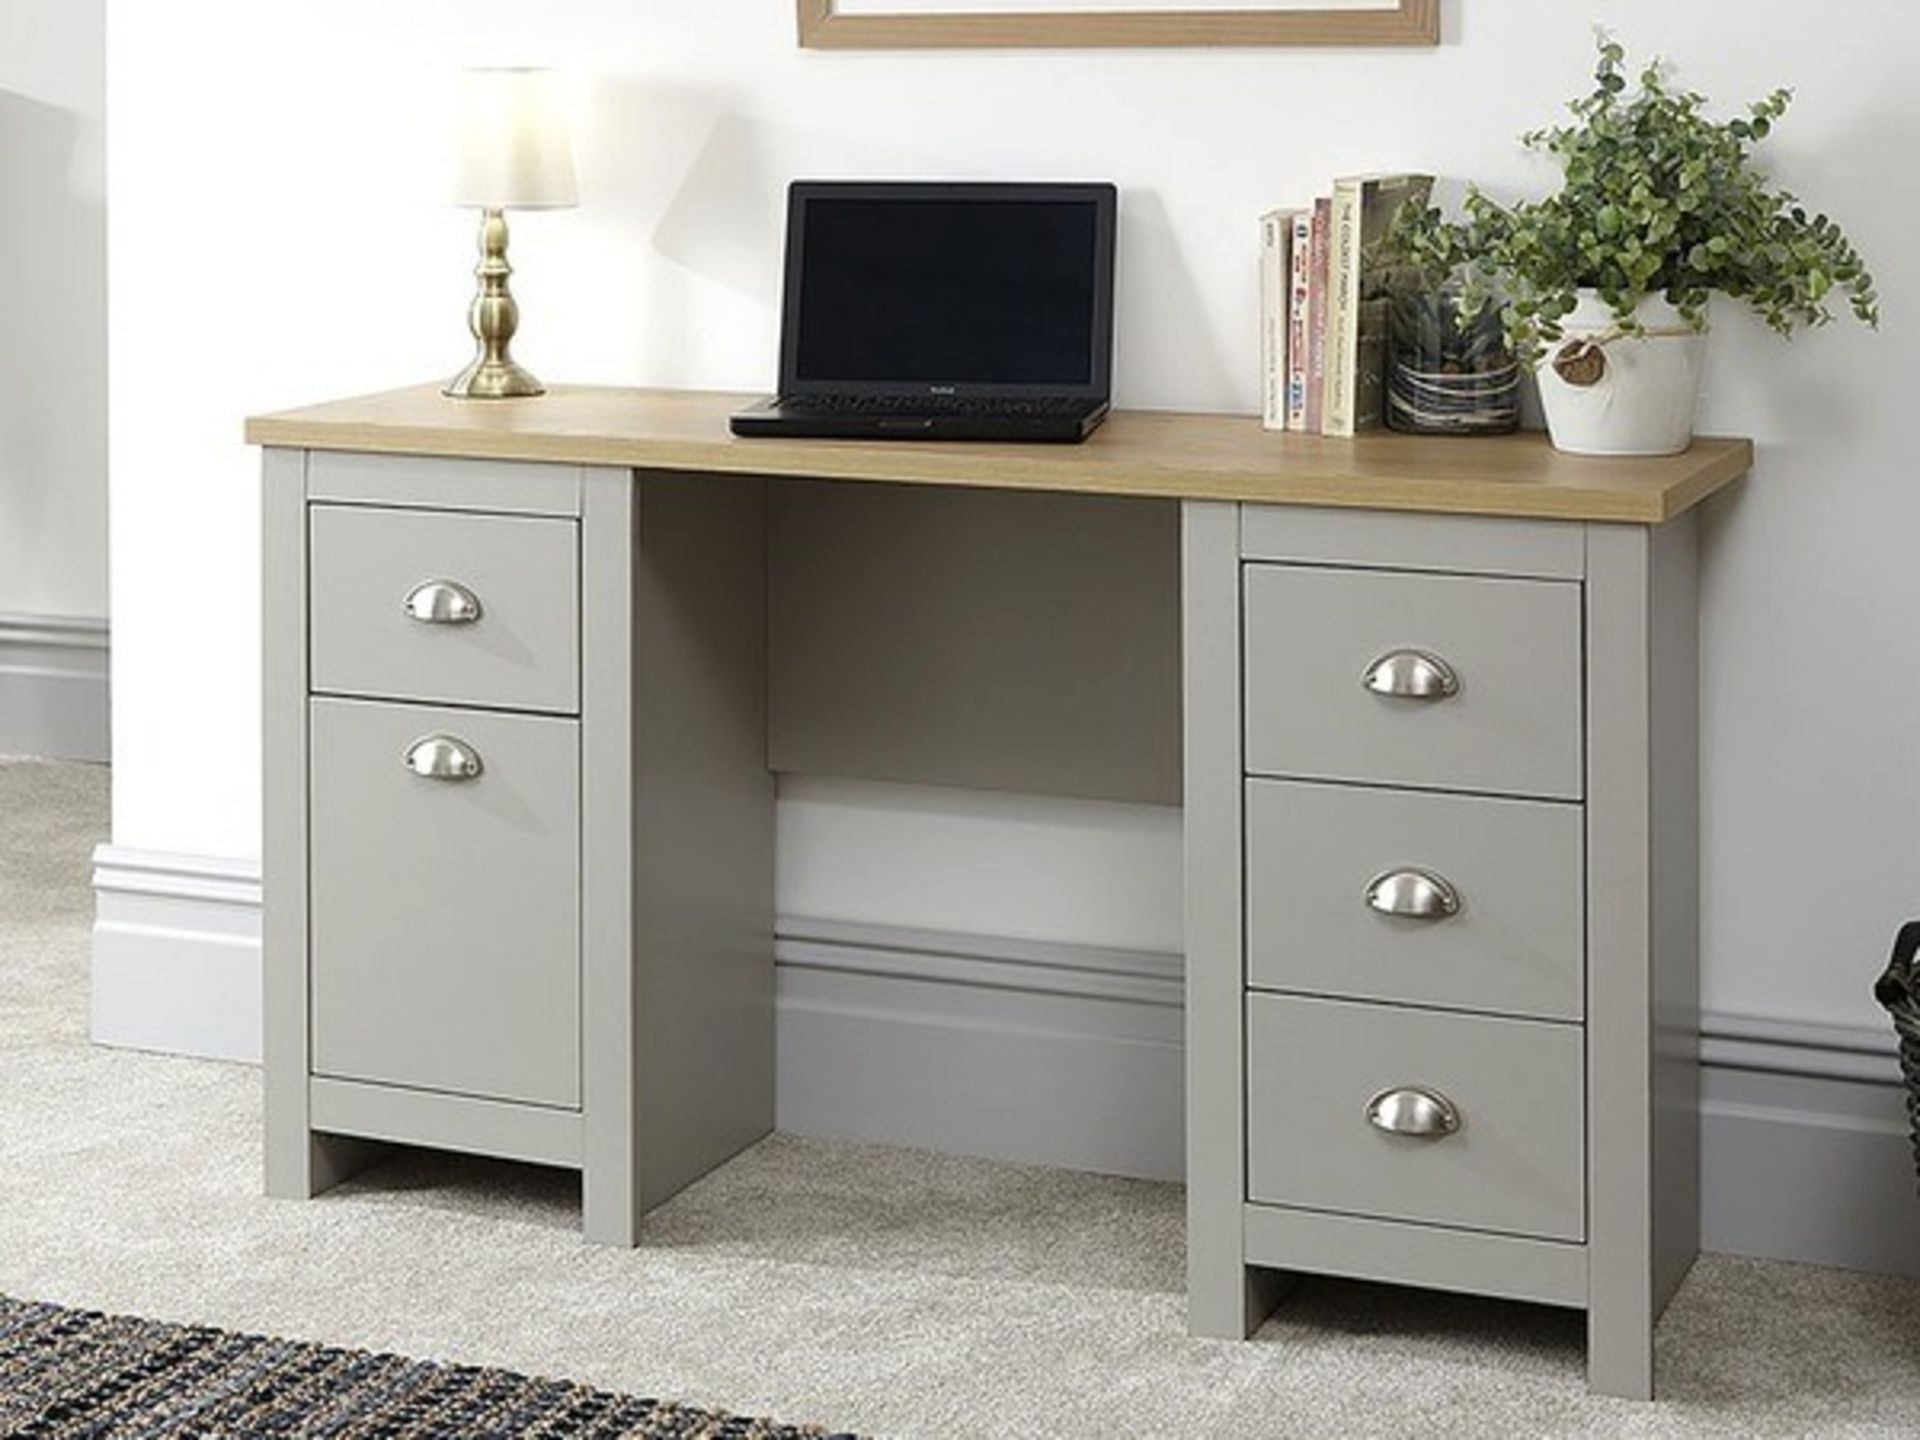 1 X LANCASTER STUDY DESK IN GREY - BOXED 1453MM X500MM X 72 MM